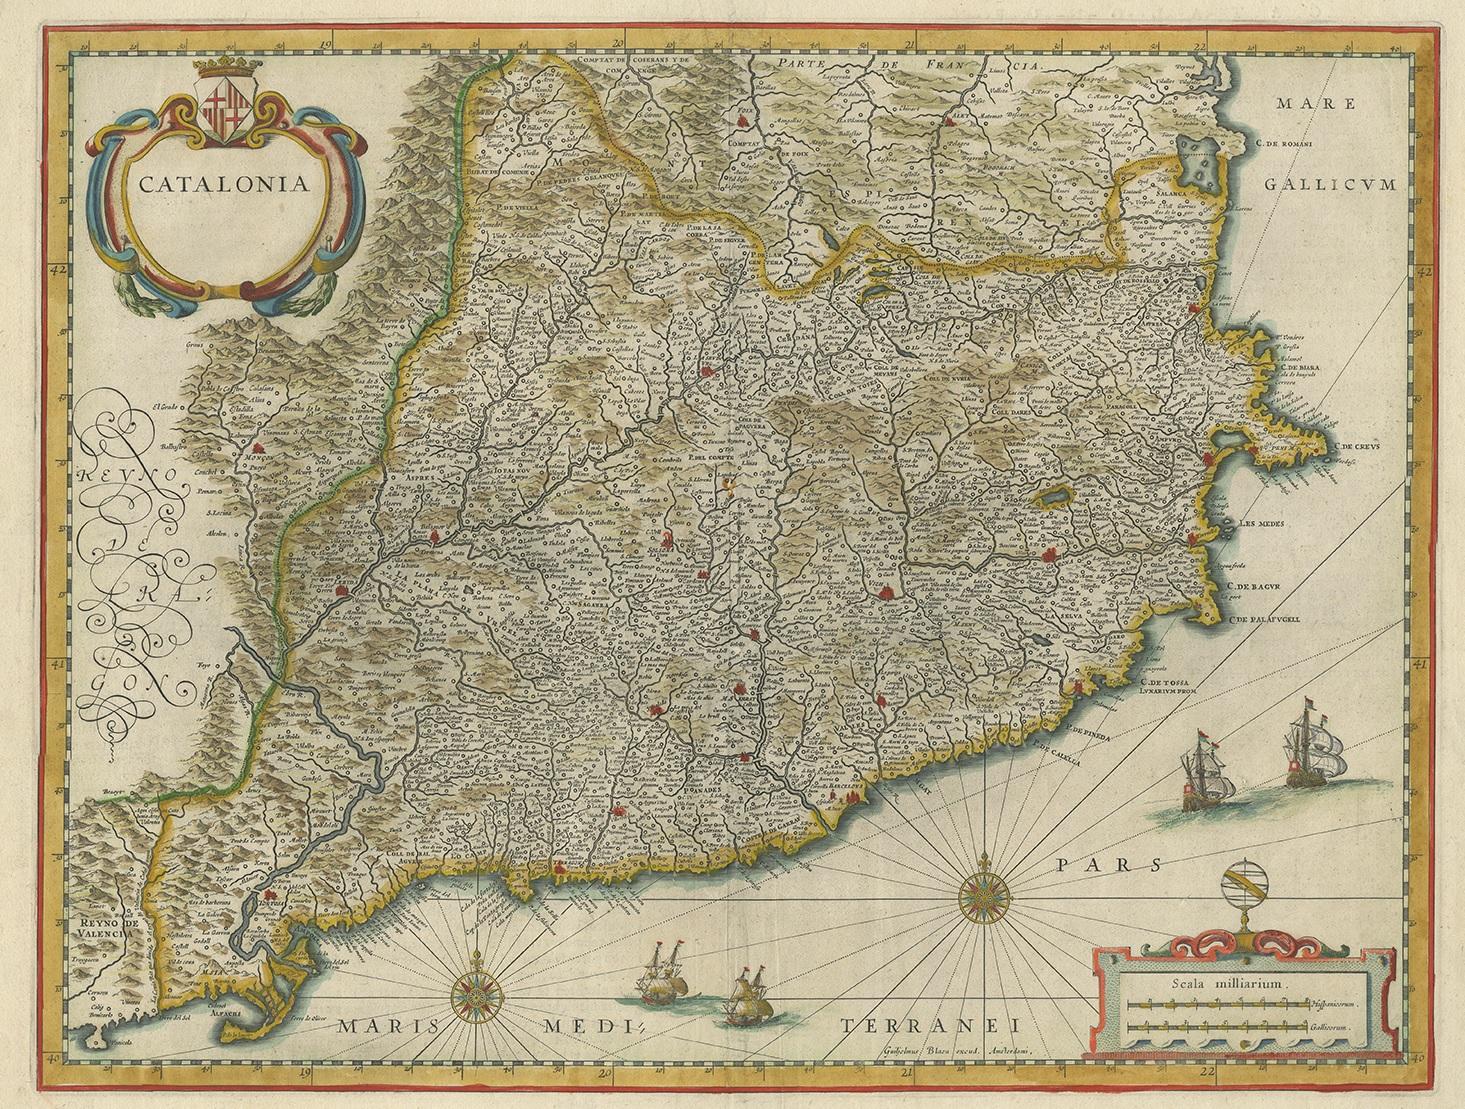 Antique map titled 'Catalonia'. Antique map of Catalonia, extending from C. De Romani on the Northern Coast to Alfachs and Panicola in Valencia on the southern end of the coast and showing the entirety of Catalonia in tremendous detail. Published by